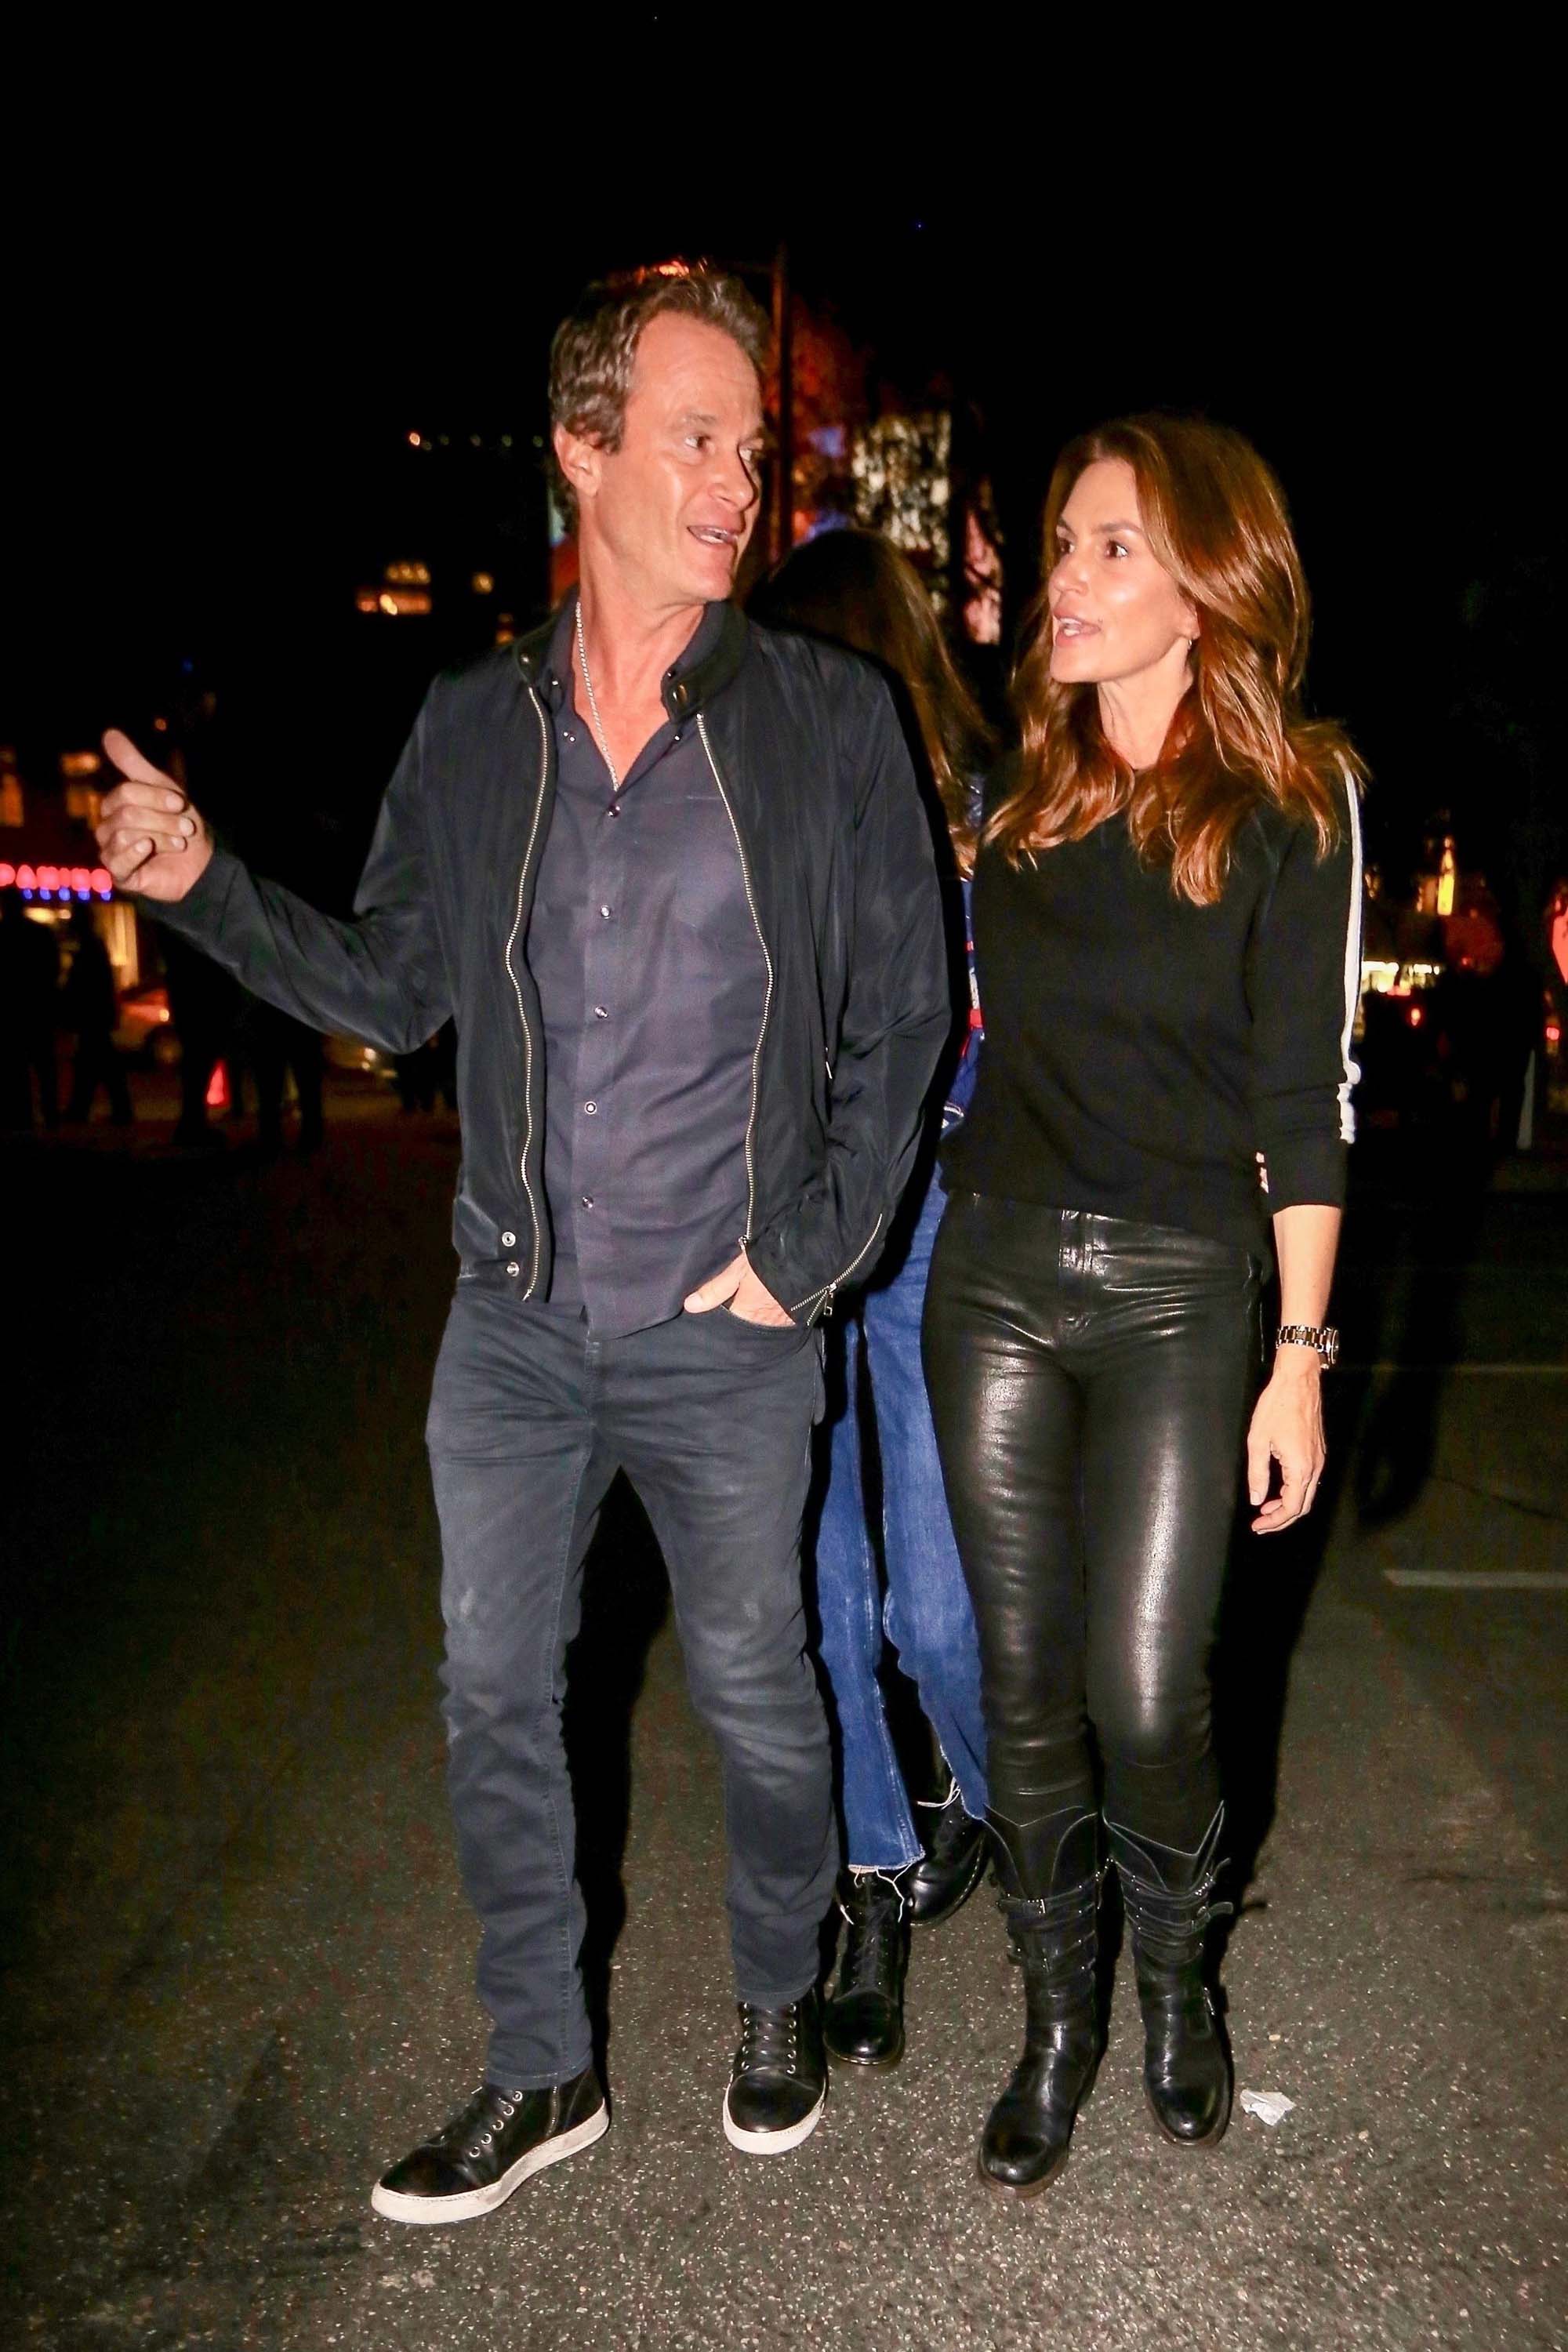 Cindy Crawford arrives at an event